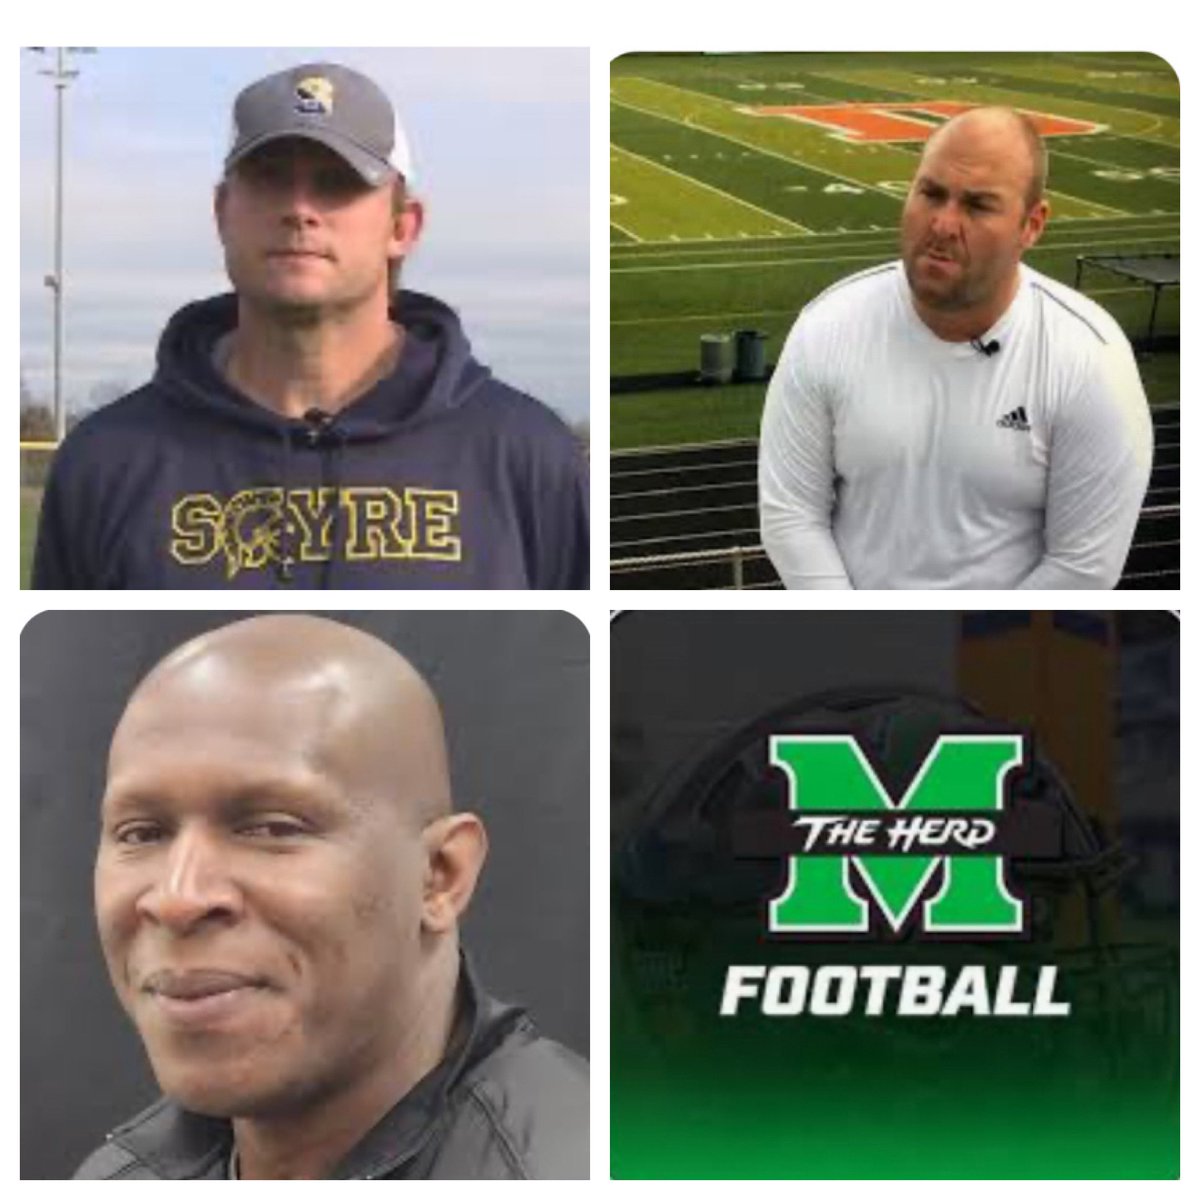 Best of luck to these former @HerdFB greats, as they lead their teams into the 2nd round of @KHSAA playoffs. @ChadPennington • @lexsayrefb @coachnatemcpeek • @FDouglassFB Melvin Cunningham • @murrayhighFB #HerdFamily #OneHerd #HerdBrotherhood